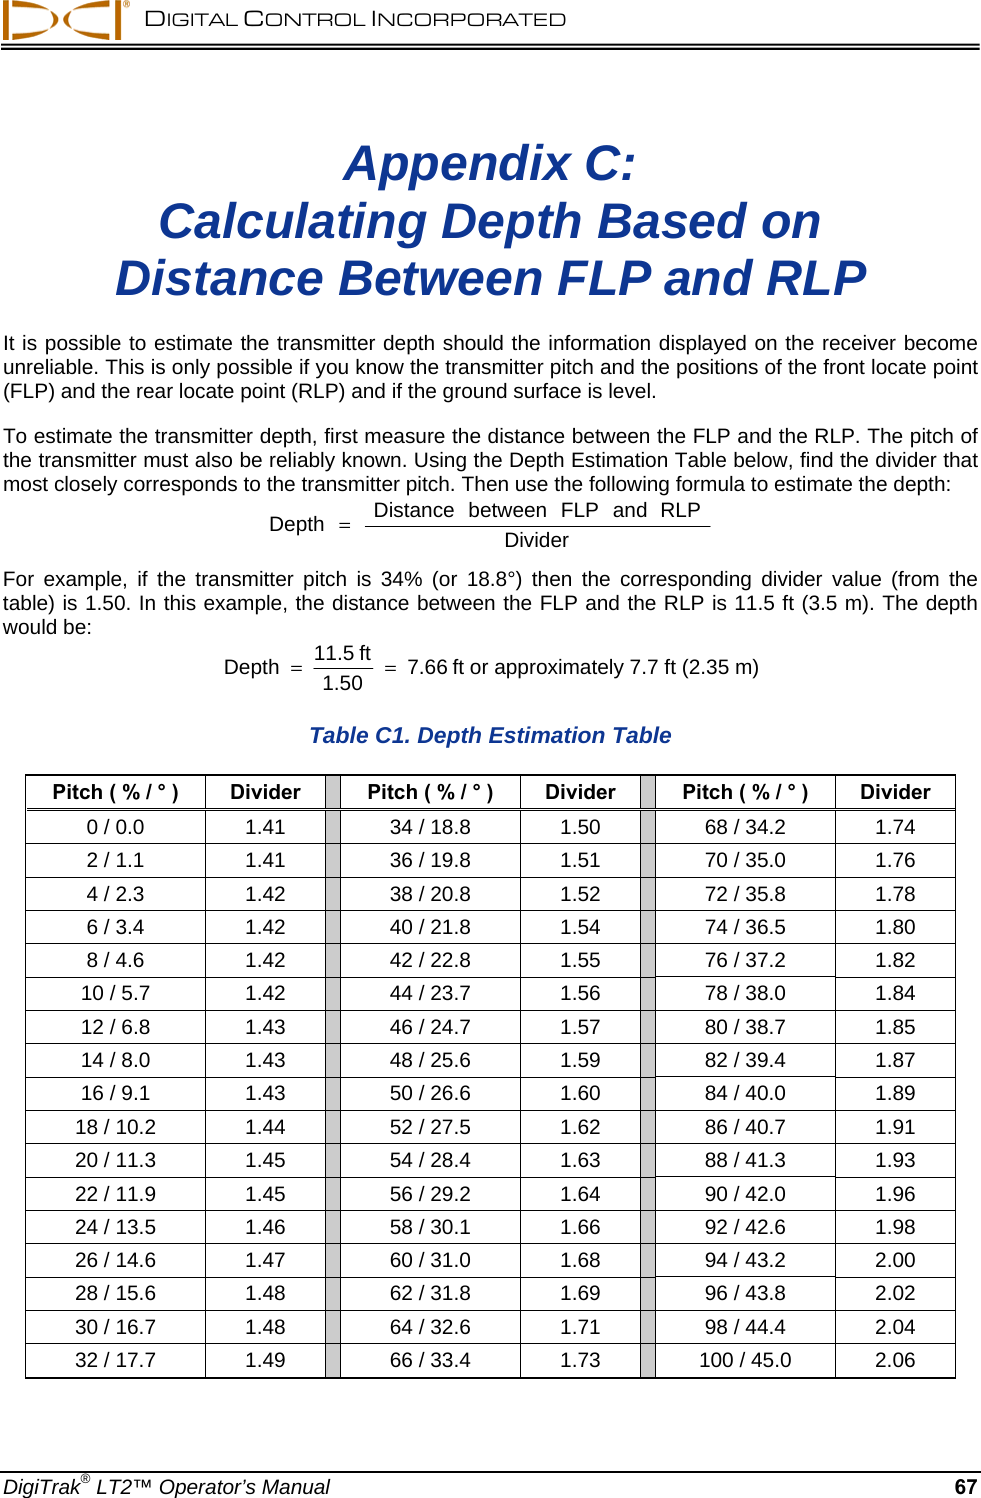   DIGITAL CONTROL INCORPORATED   Appendix C:  Calculating Depth Based on  Distance Between FLP and RLP  It is possible to estimate the transmitter depth should the information displayed on the receiver become unreliable. This is only possible if you know the transmitter pitch and the positions of the front locate point (FLP) and the rear locate point (RLP) and if the ground surface is level.  To estimate the transmitter depth, first measure the distance between the FLP and the RLP. The pitch of the transmitter must also be reliably known. Using the Depth Estimation Table below, find the divider that most closely corresponds to the transmitter pitch. Then use the following formula to estimate the depth: DividerRLPandFLPbetweenDistanceDepth  For example, if the transmitter pitch is 34% (or 18.8°) then the corresponding divider value (from the table) is 1.50. In this example, the distance between the FLP and the RLP is 11.5 ft (3.5 m). The depth would be: 7.661.50ft 11.5Depth  ft or approximately 7.7 ft (2.35 m)  Table C1. Depth Estimation Table Pitch ( % / ° )  Divider    Pitch ( % / ° )  Divider  Pitch ( % / ° )  Divider 0 / 0.0  1.41    34 / 18.8  1.50  68 / 34.2  1.74 2 / 1.1  1.41    36 / 19.8  1.51  70 / 35.0  1.76 4 / 2.3  1.42    38 / 20.8  1.52  72 / 35.8  1.78 6 / 3.4  1.42    40 / 21.8  1.54  74 / 36.5  1.80 8 / 4.6  1.42    42 / 22.8  1.55  76 / 37.2  1.82 10 / 5.7  1.42    44 / 23.7  1.56  78 / 38.0  1.84 12 / 6.8  1.43    46 / 24.7  1.57  80 / 38.7  1.85 14 / 8.0  1.43    48 / 25.6  1.59  82 / 39.4  1.87 16 / 9.1  1.43    50 / 26.6  1.60  84 / 40.0  1.89 18 / 10.2  1.44    52 / 27.5  1.62  86 / 40.7  1.91 20 / 11.3  1.45    54 / 28.4  1.63  88 / 41.3  1.93 22 / 11.9  1.45    56 / 29.2  1.64  90 / 42.0  1.96 24 / 13.5  1.46    58 / 30.1  1.66  92 / 42.6  1.98 26 / 14.6  1.47    60 / 31.0  1.68  94 / 43.2  2.00 28 / 15.6  1.48    62 / 31.8  1.69  96 / 43.8  2.02 30 / 16.7  1.48    64 / 32.6  1.71  98 / 44.4  2.04 32 / 17.7  1.49    66 / 33.4  1.73  100 / 45.0  2.06 DigiTrak® LT2™ Operator’s Manual 67 